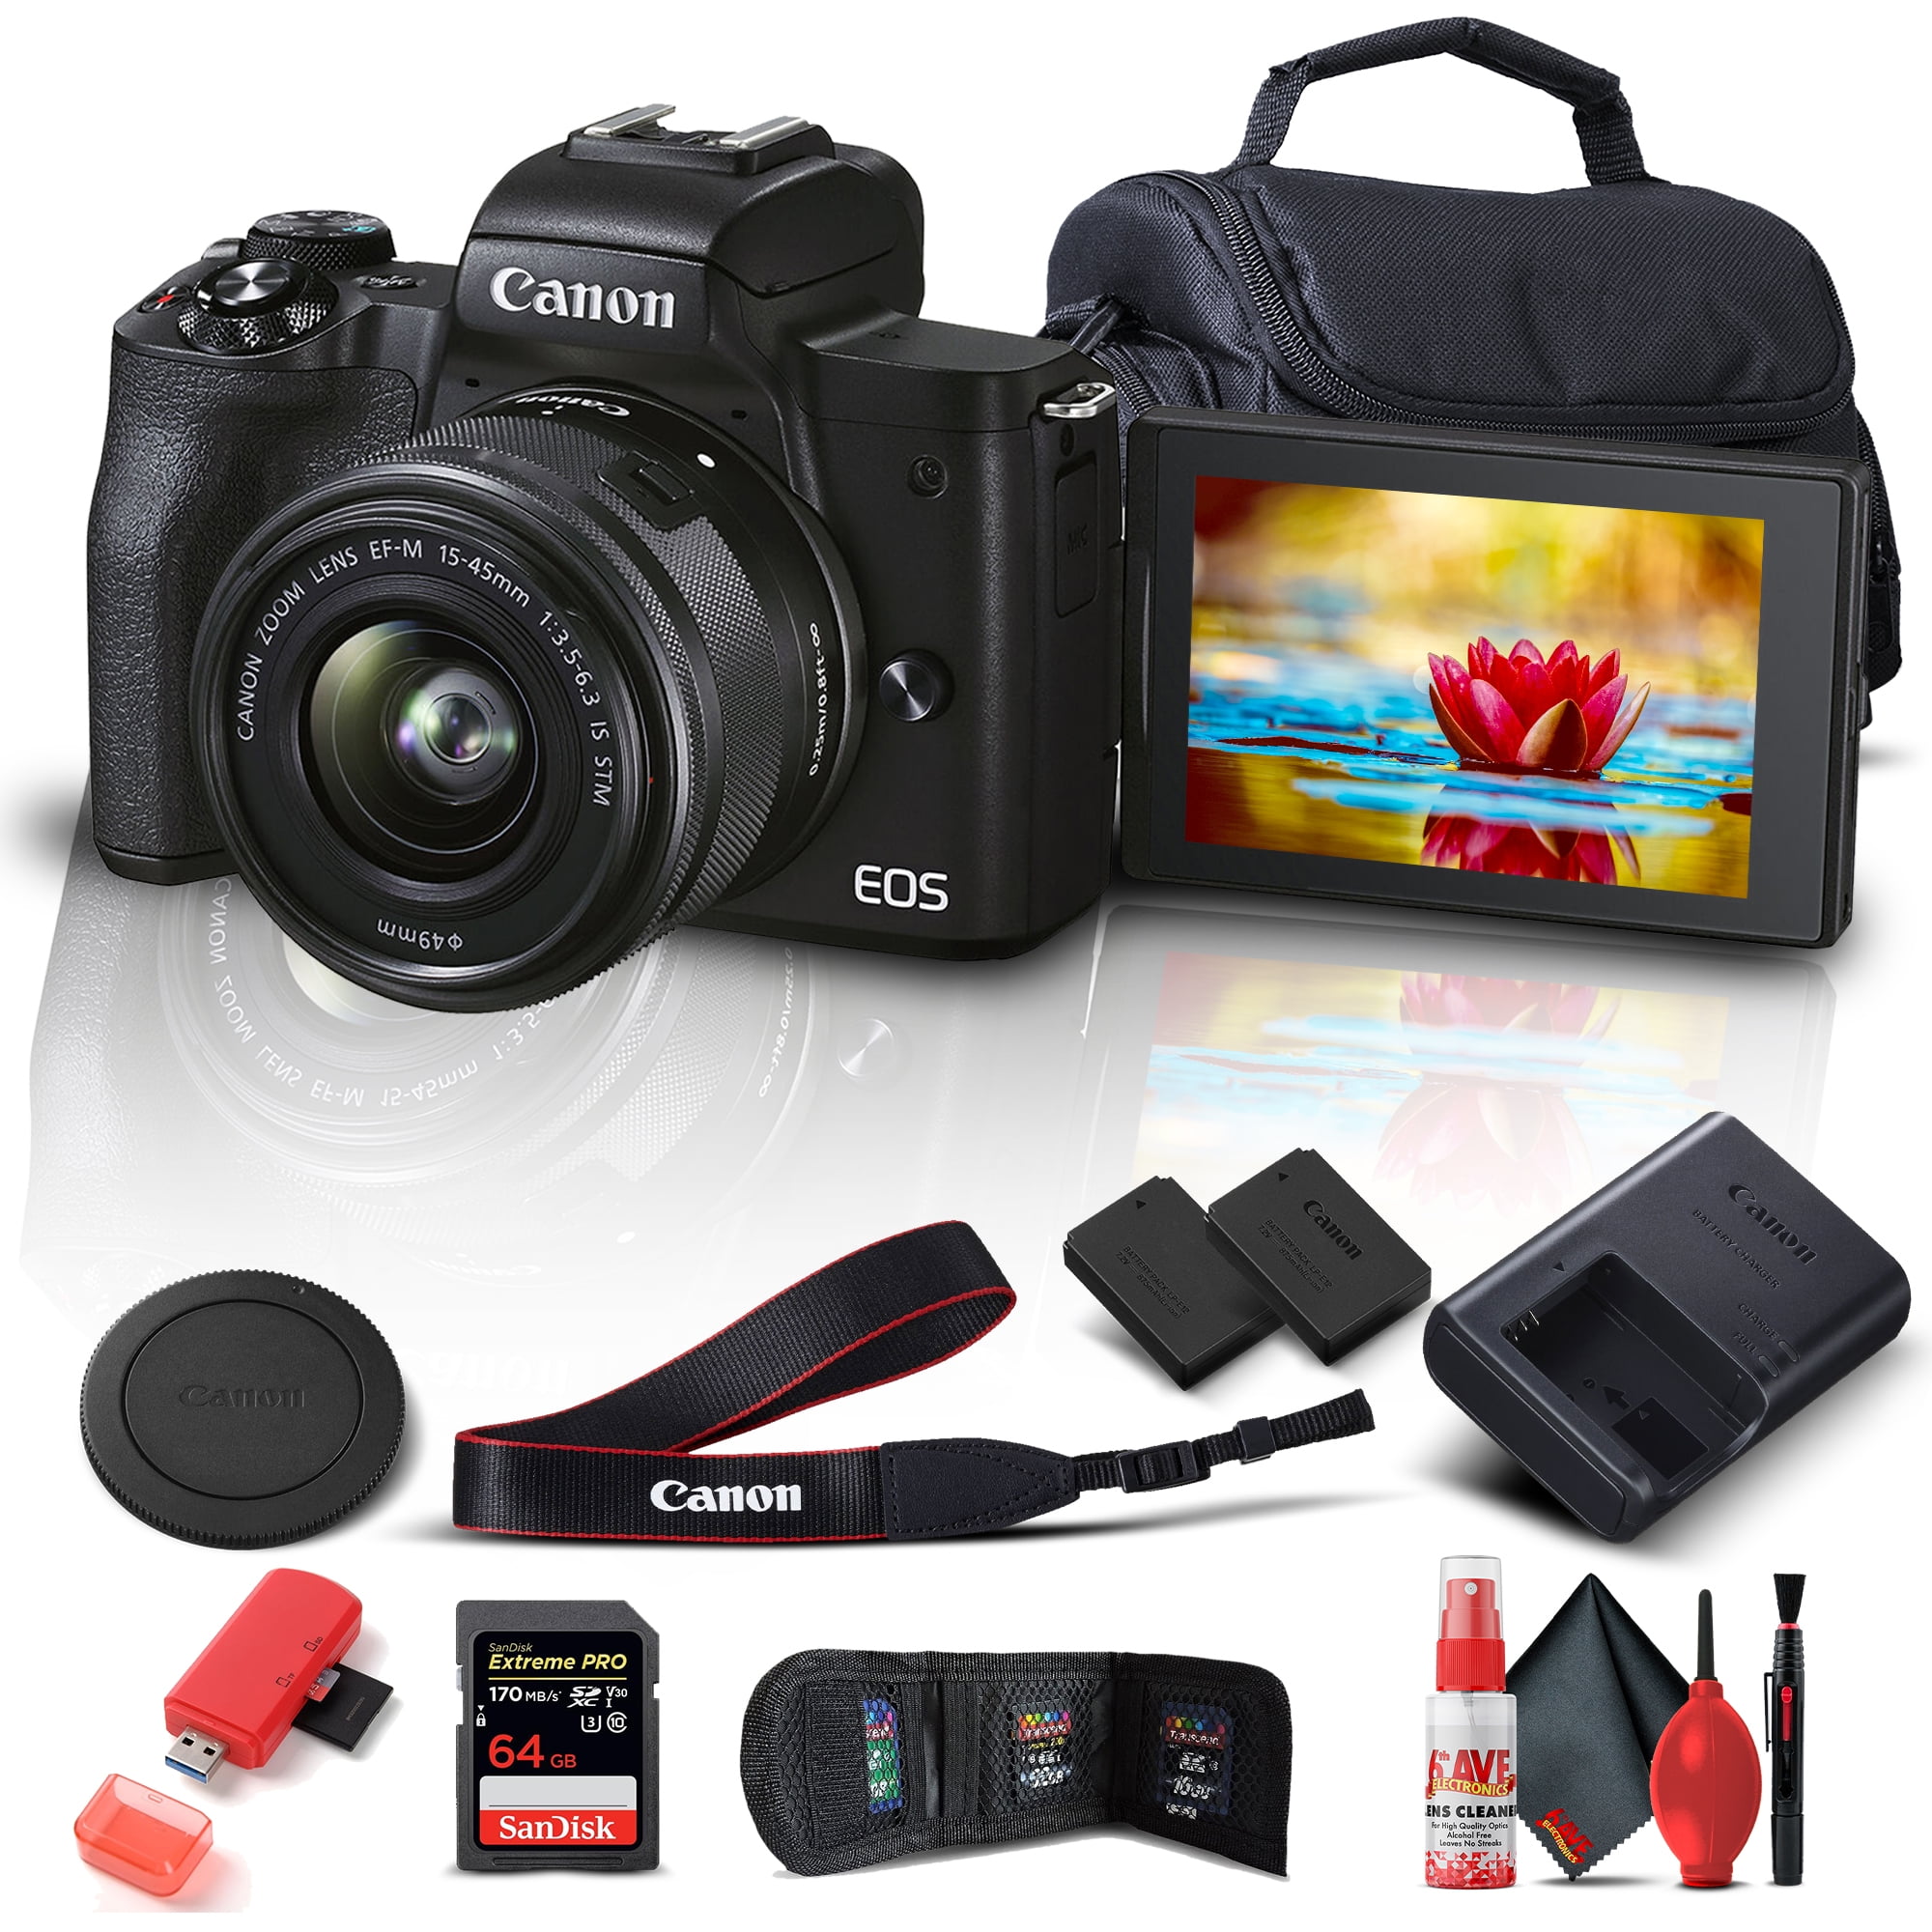 Canon EOS M50 Mark II Mirrorless Digital Camera with 15-45mm Lens (Black) (4728C006) + 64GB Pro Card + Extra LPE12 + Case + Card Reader Deluxe Cleaning Set + Memory Wallet + More - Walmart.com